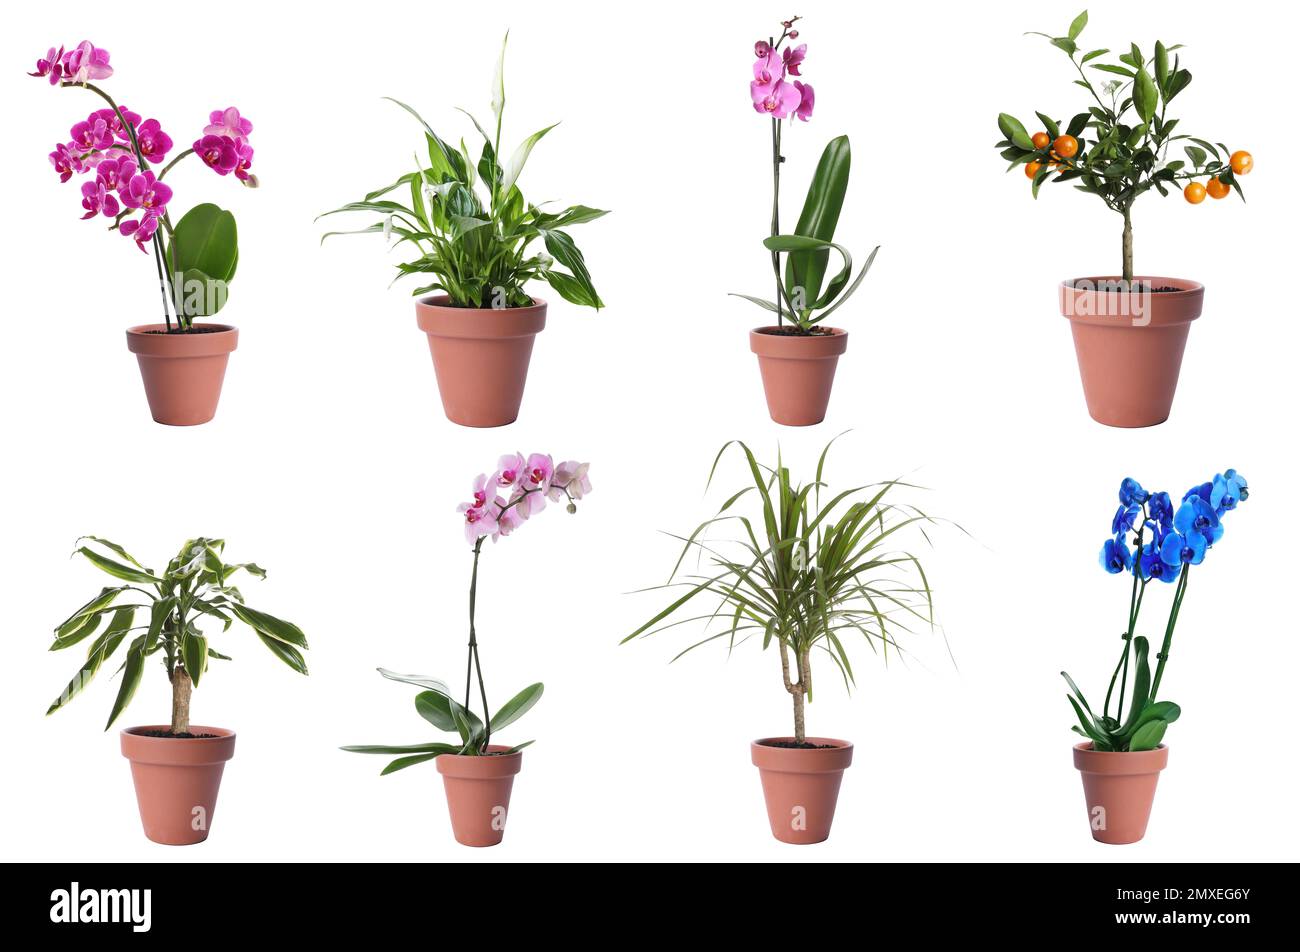 Set of different houseplants in flower pots on white background Stock Photo